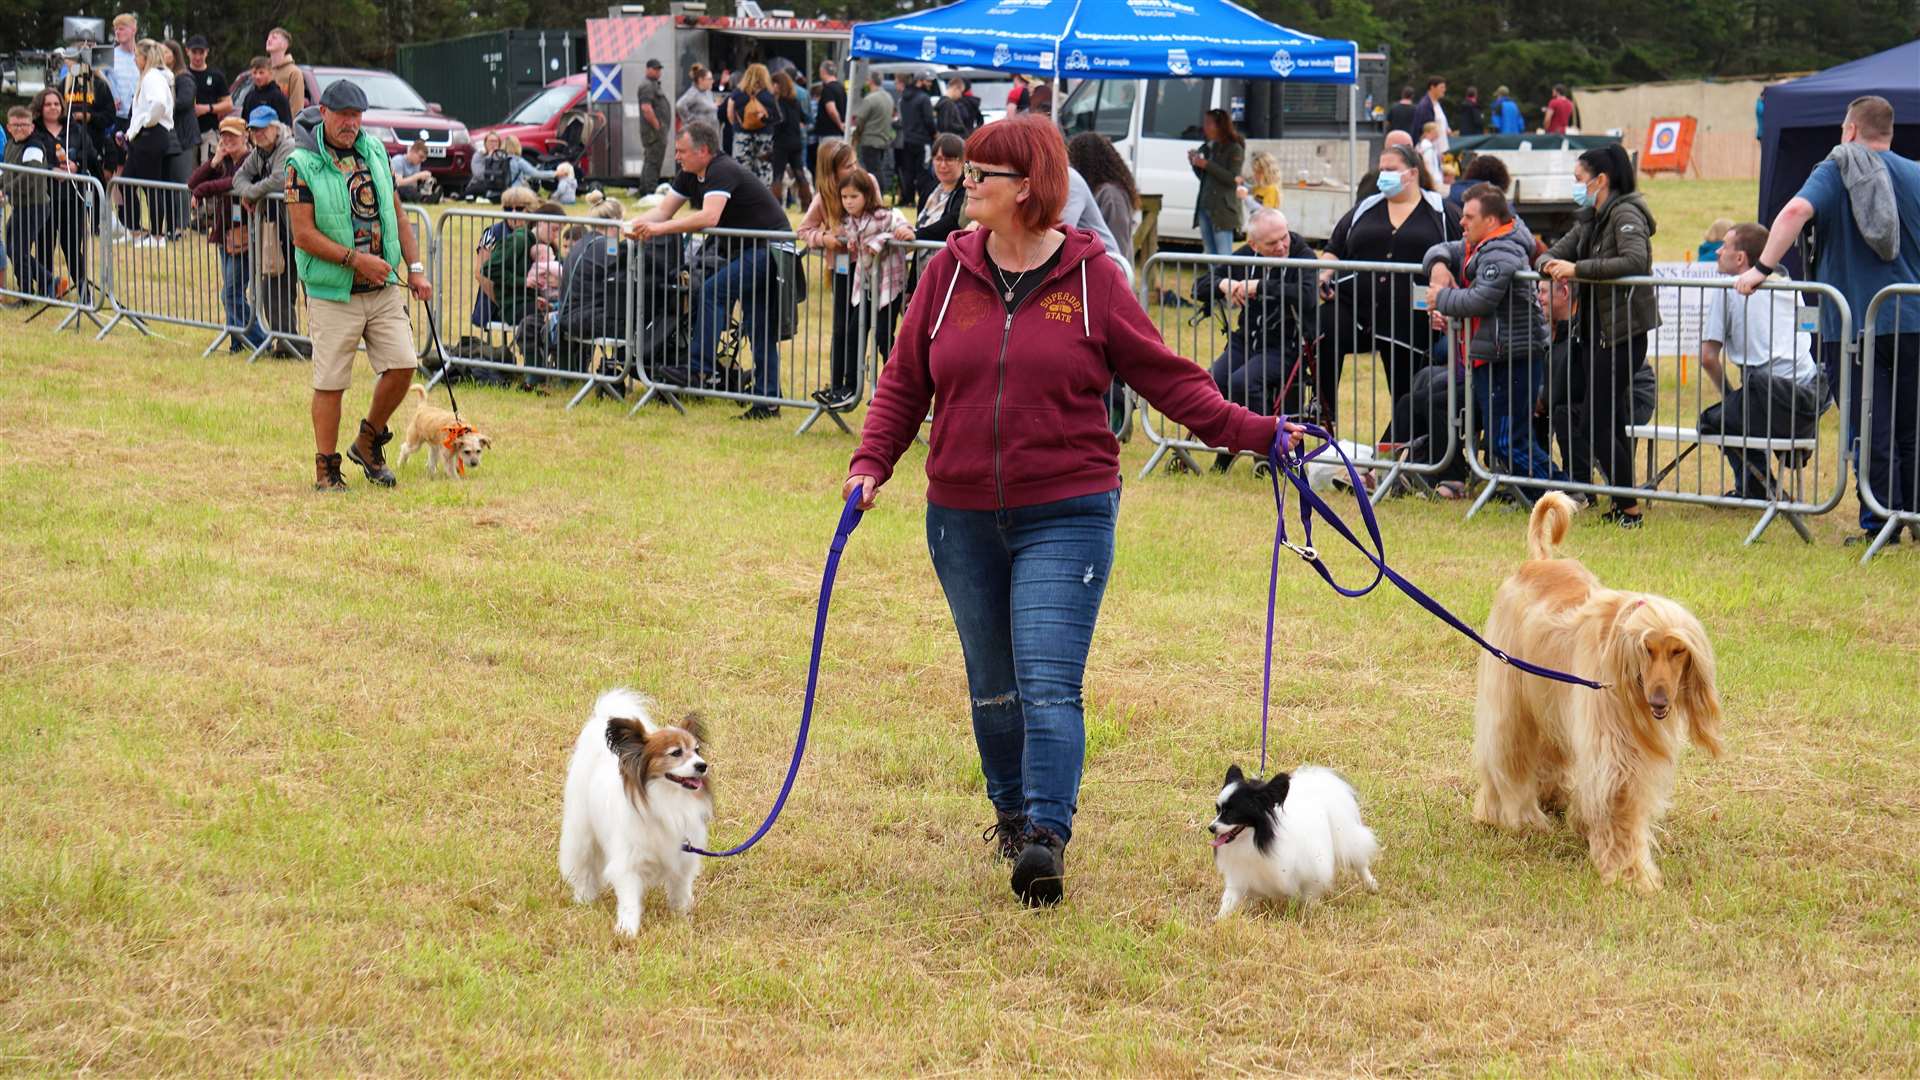 Breeds of every shape and size were represented on the field for the various dog competitions. Picture: DGS